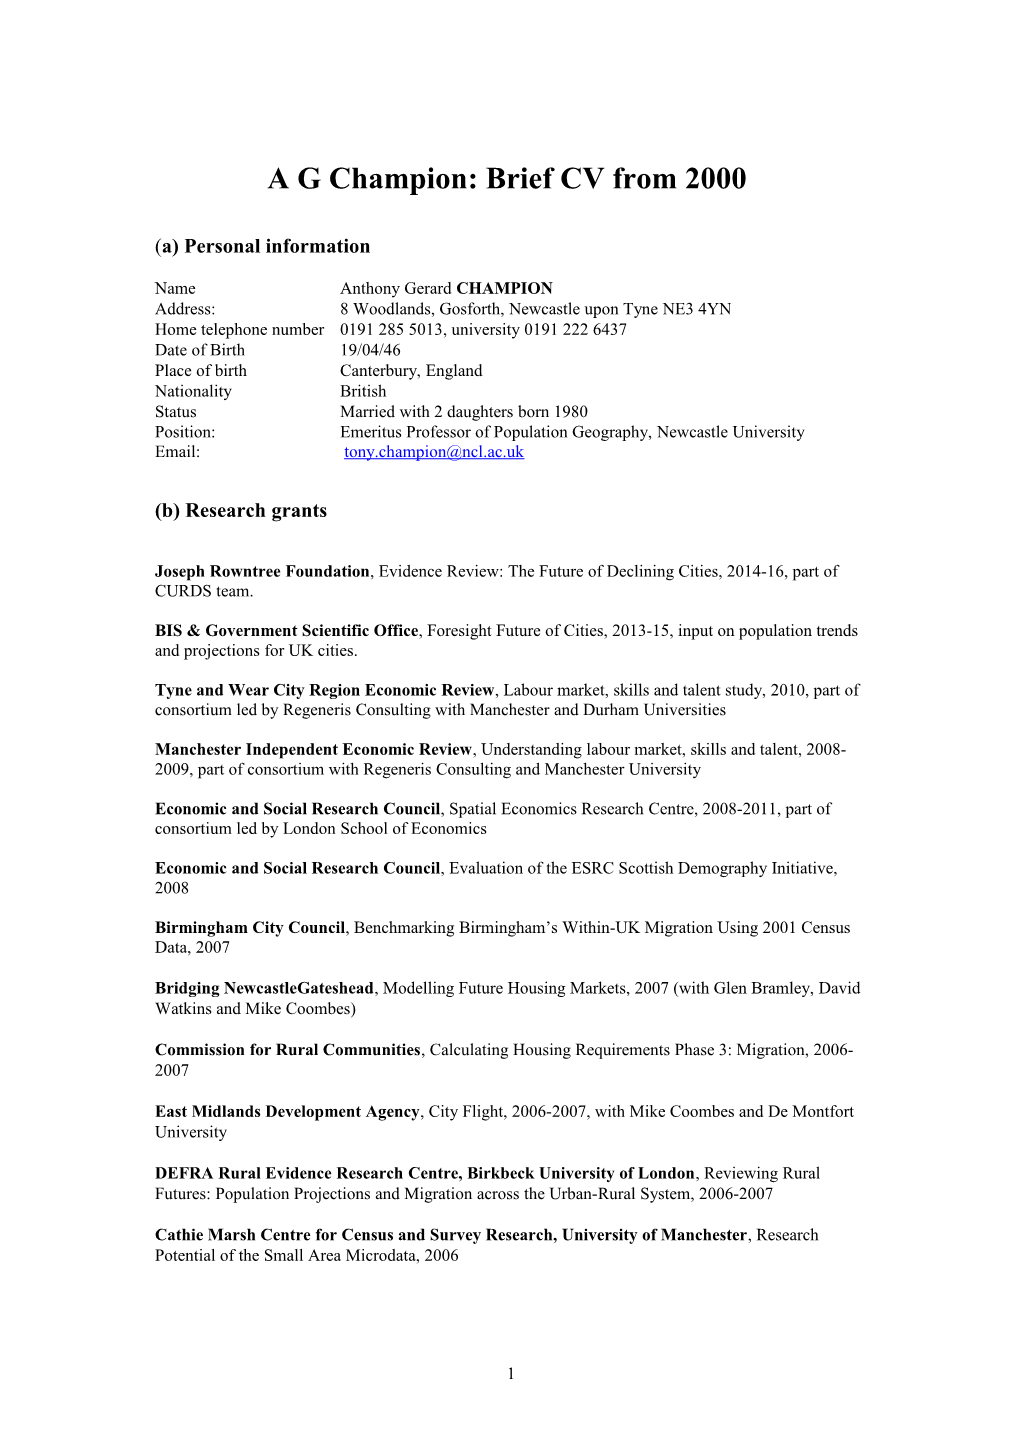 A G Champion: Brief CV from 2000 3 April 2008